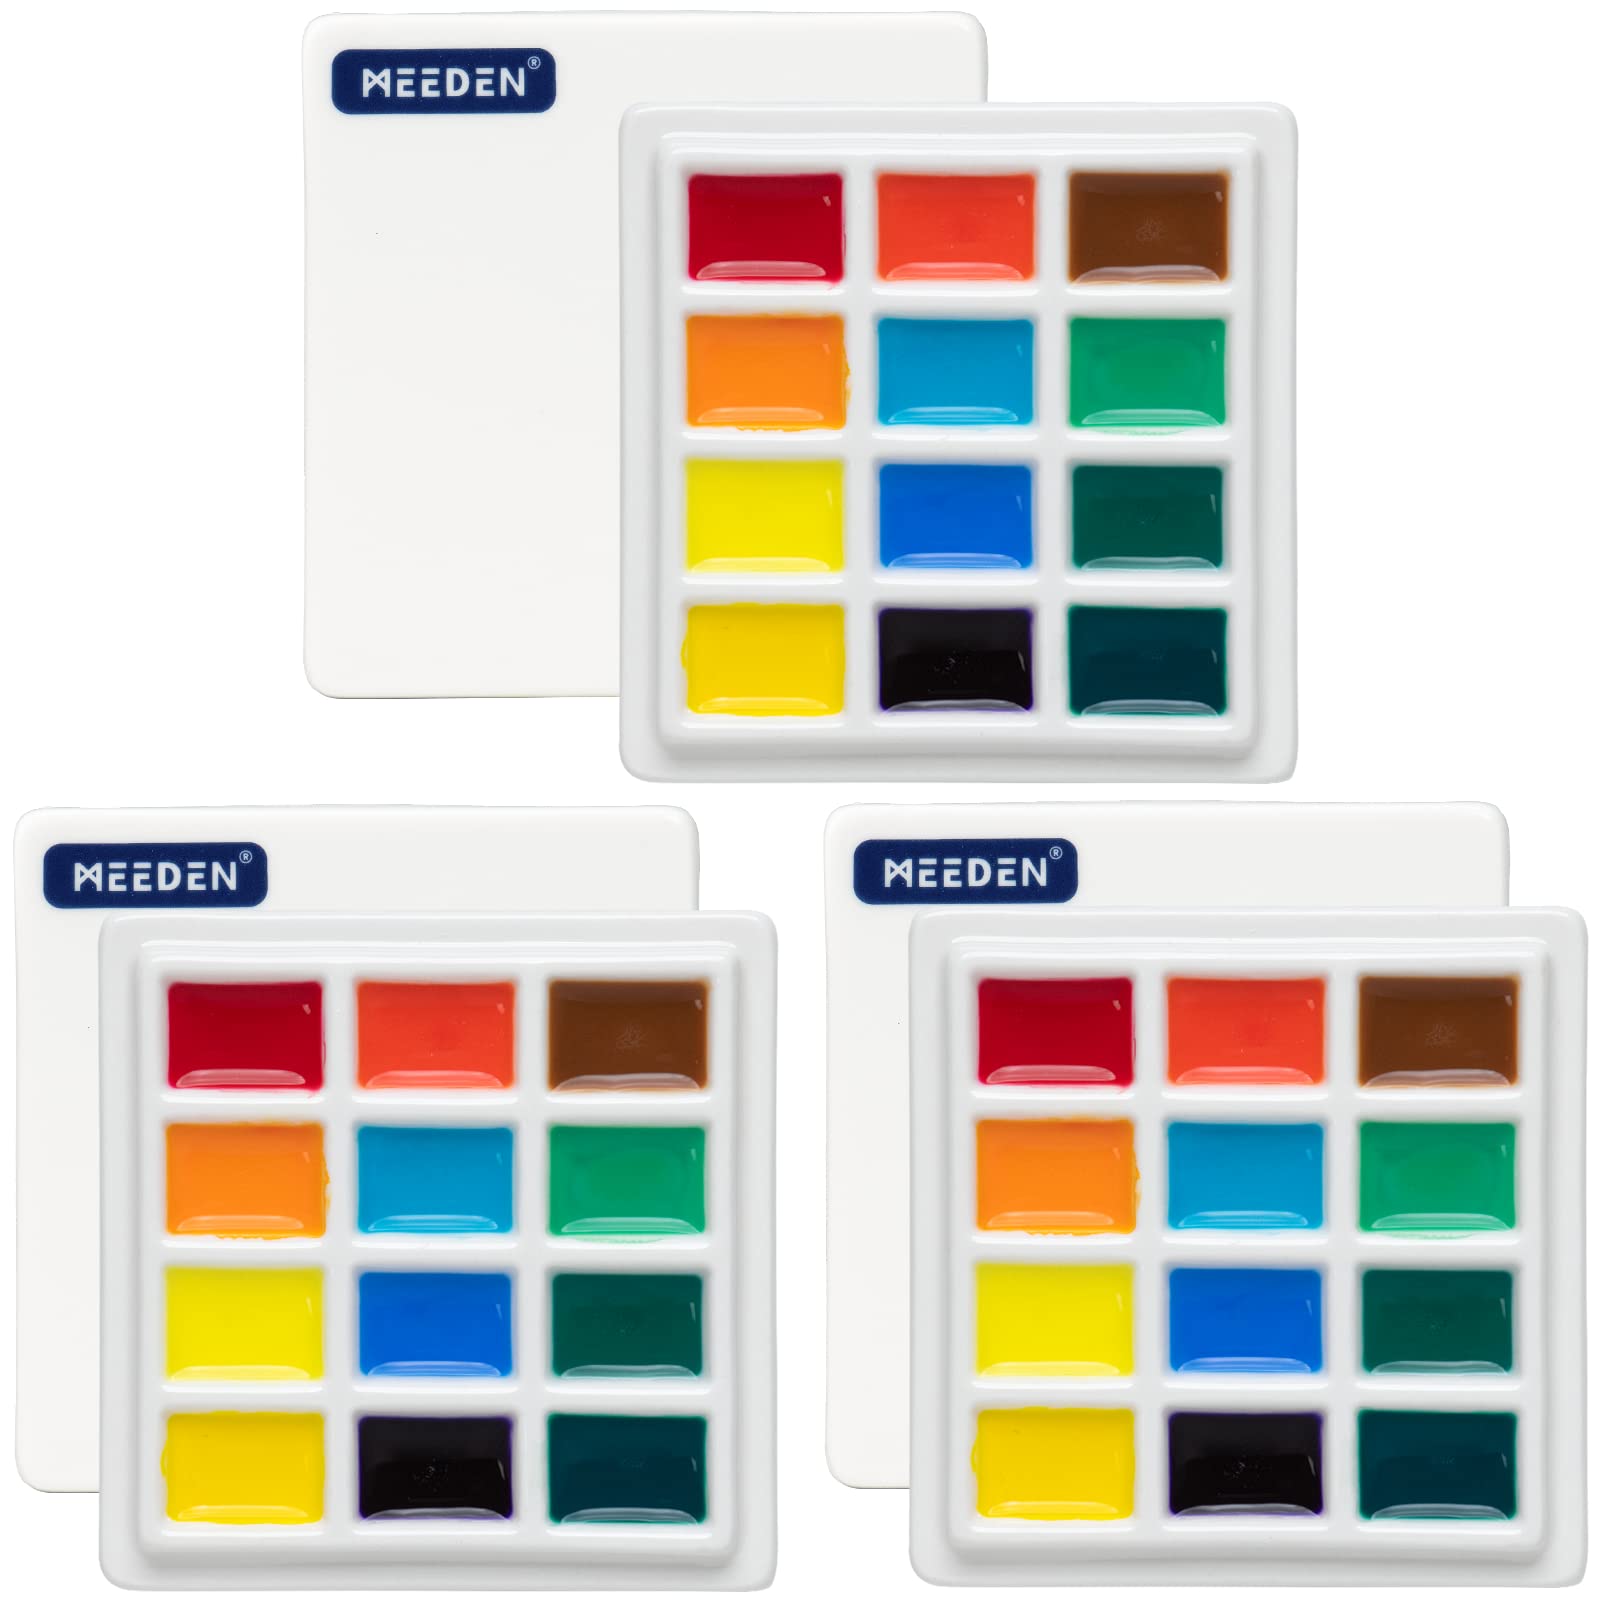 MEEDEN 3 Pack Ceramic Palette with Covers, Porcelain Paint Palette for  Watercolor and Gouache Color Mixing, Art Crafts Supplies